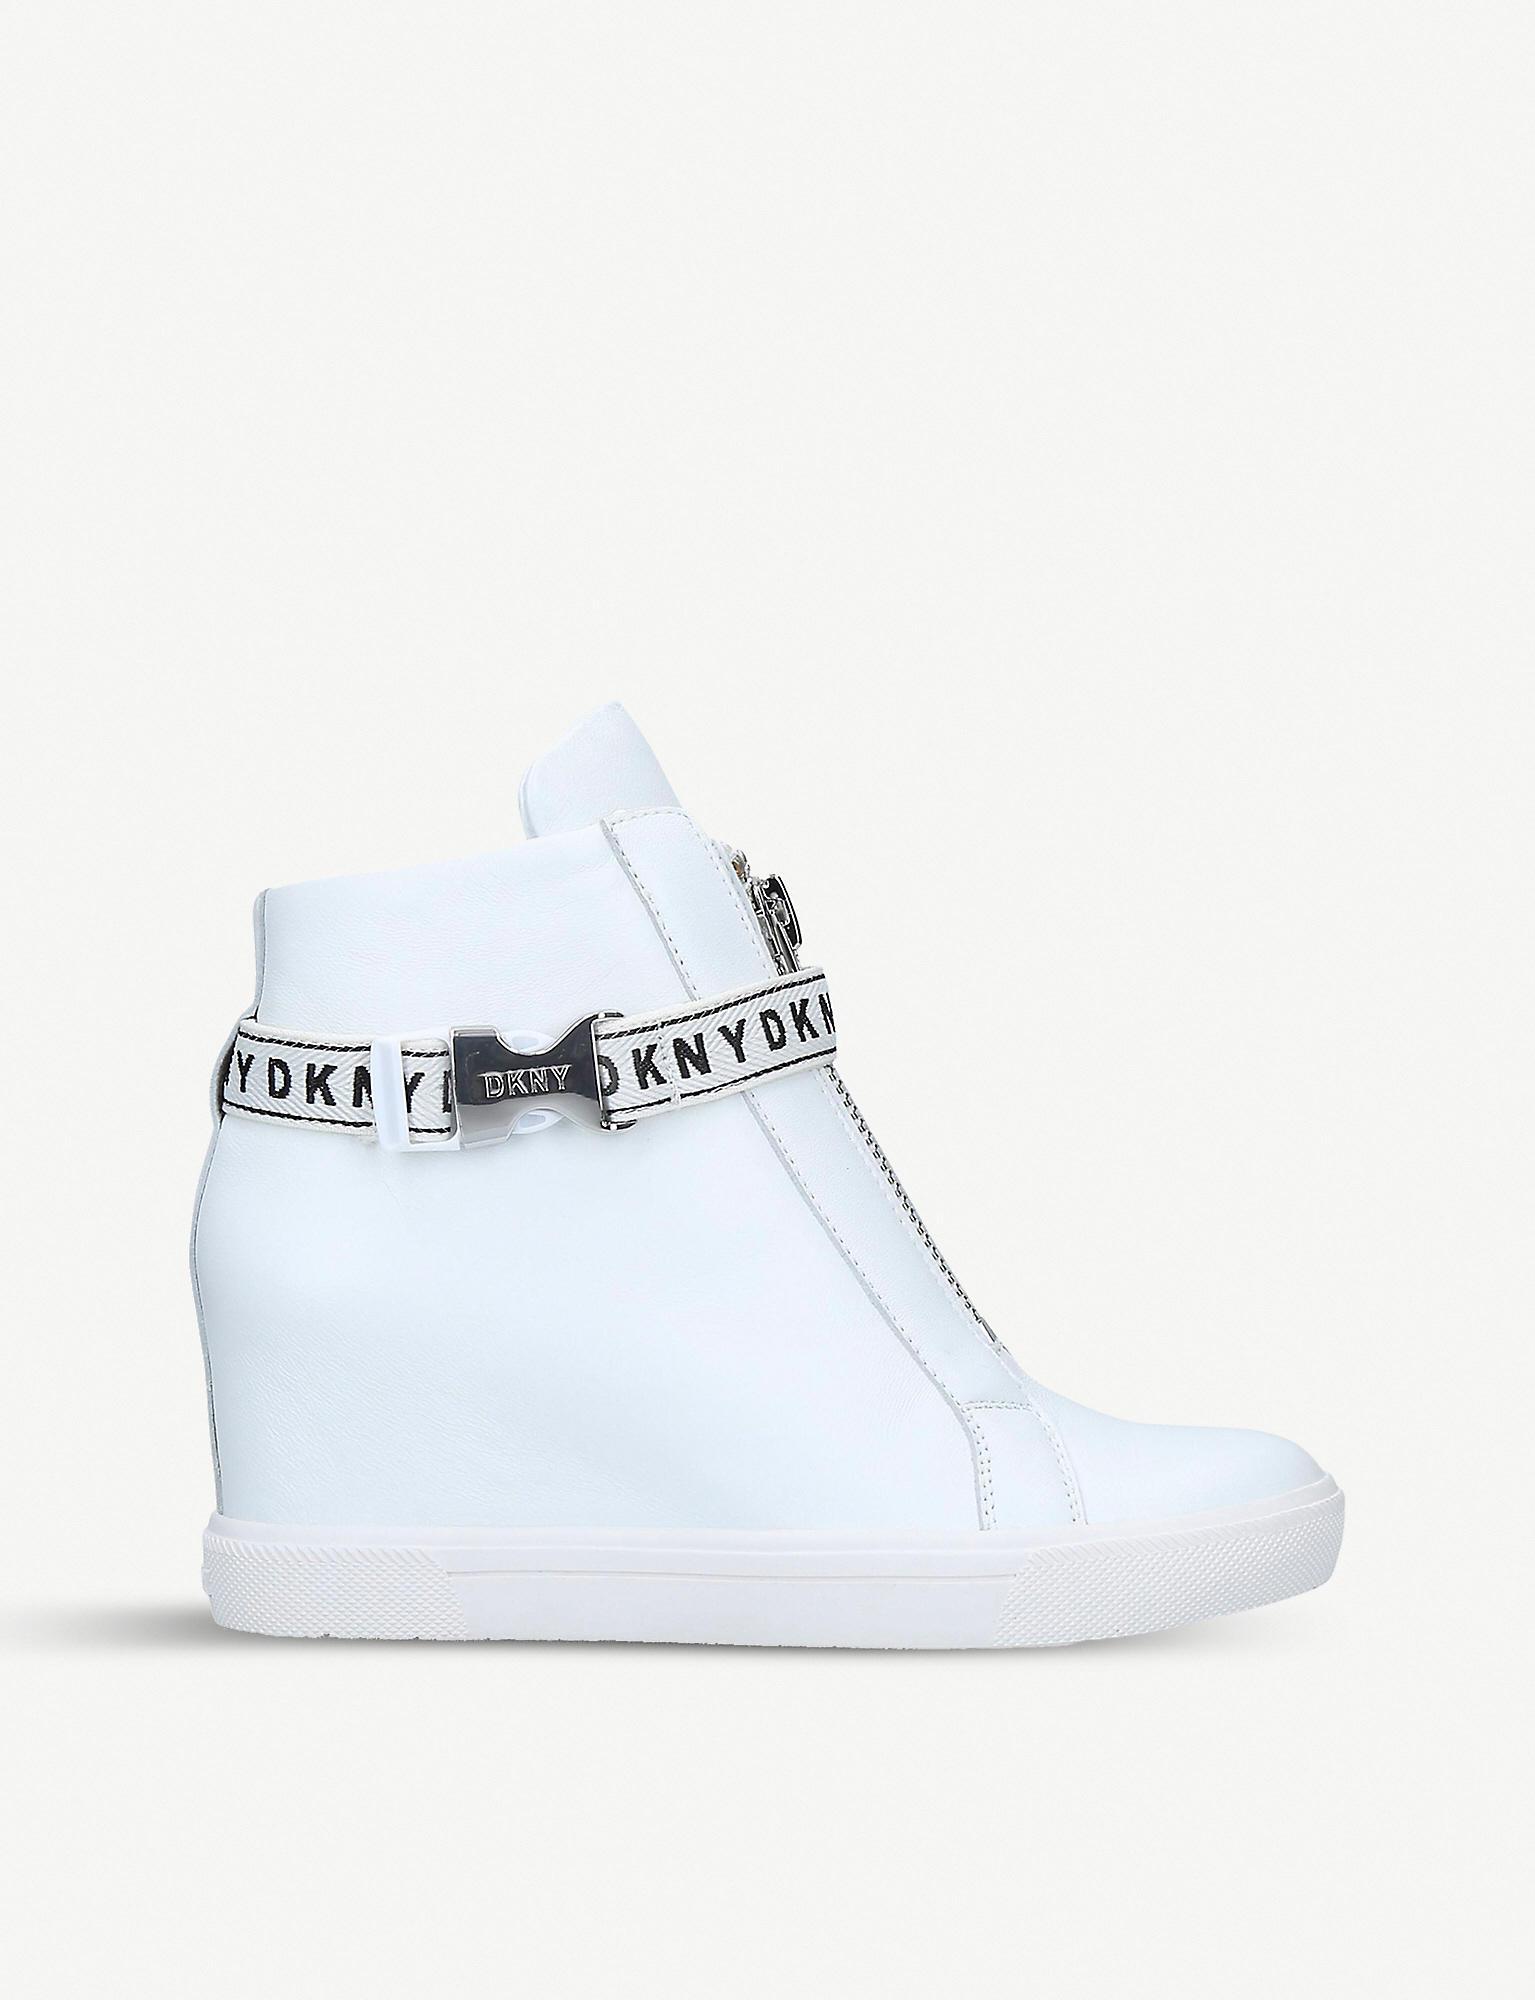 DKNY Caddie Wedge Sneakers, Created For Macy's in White | Lyst Canada